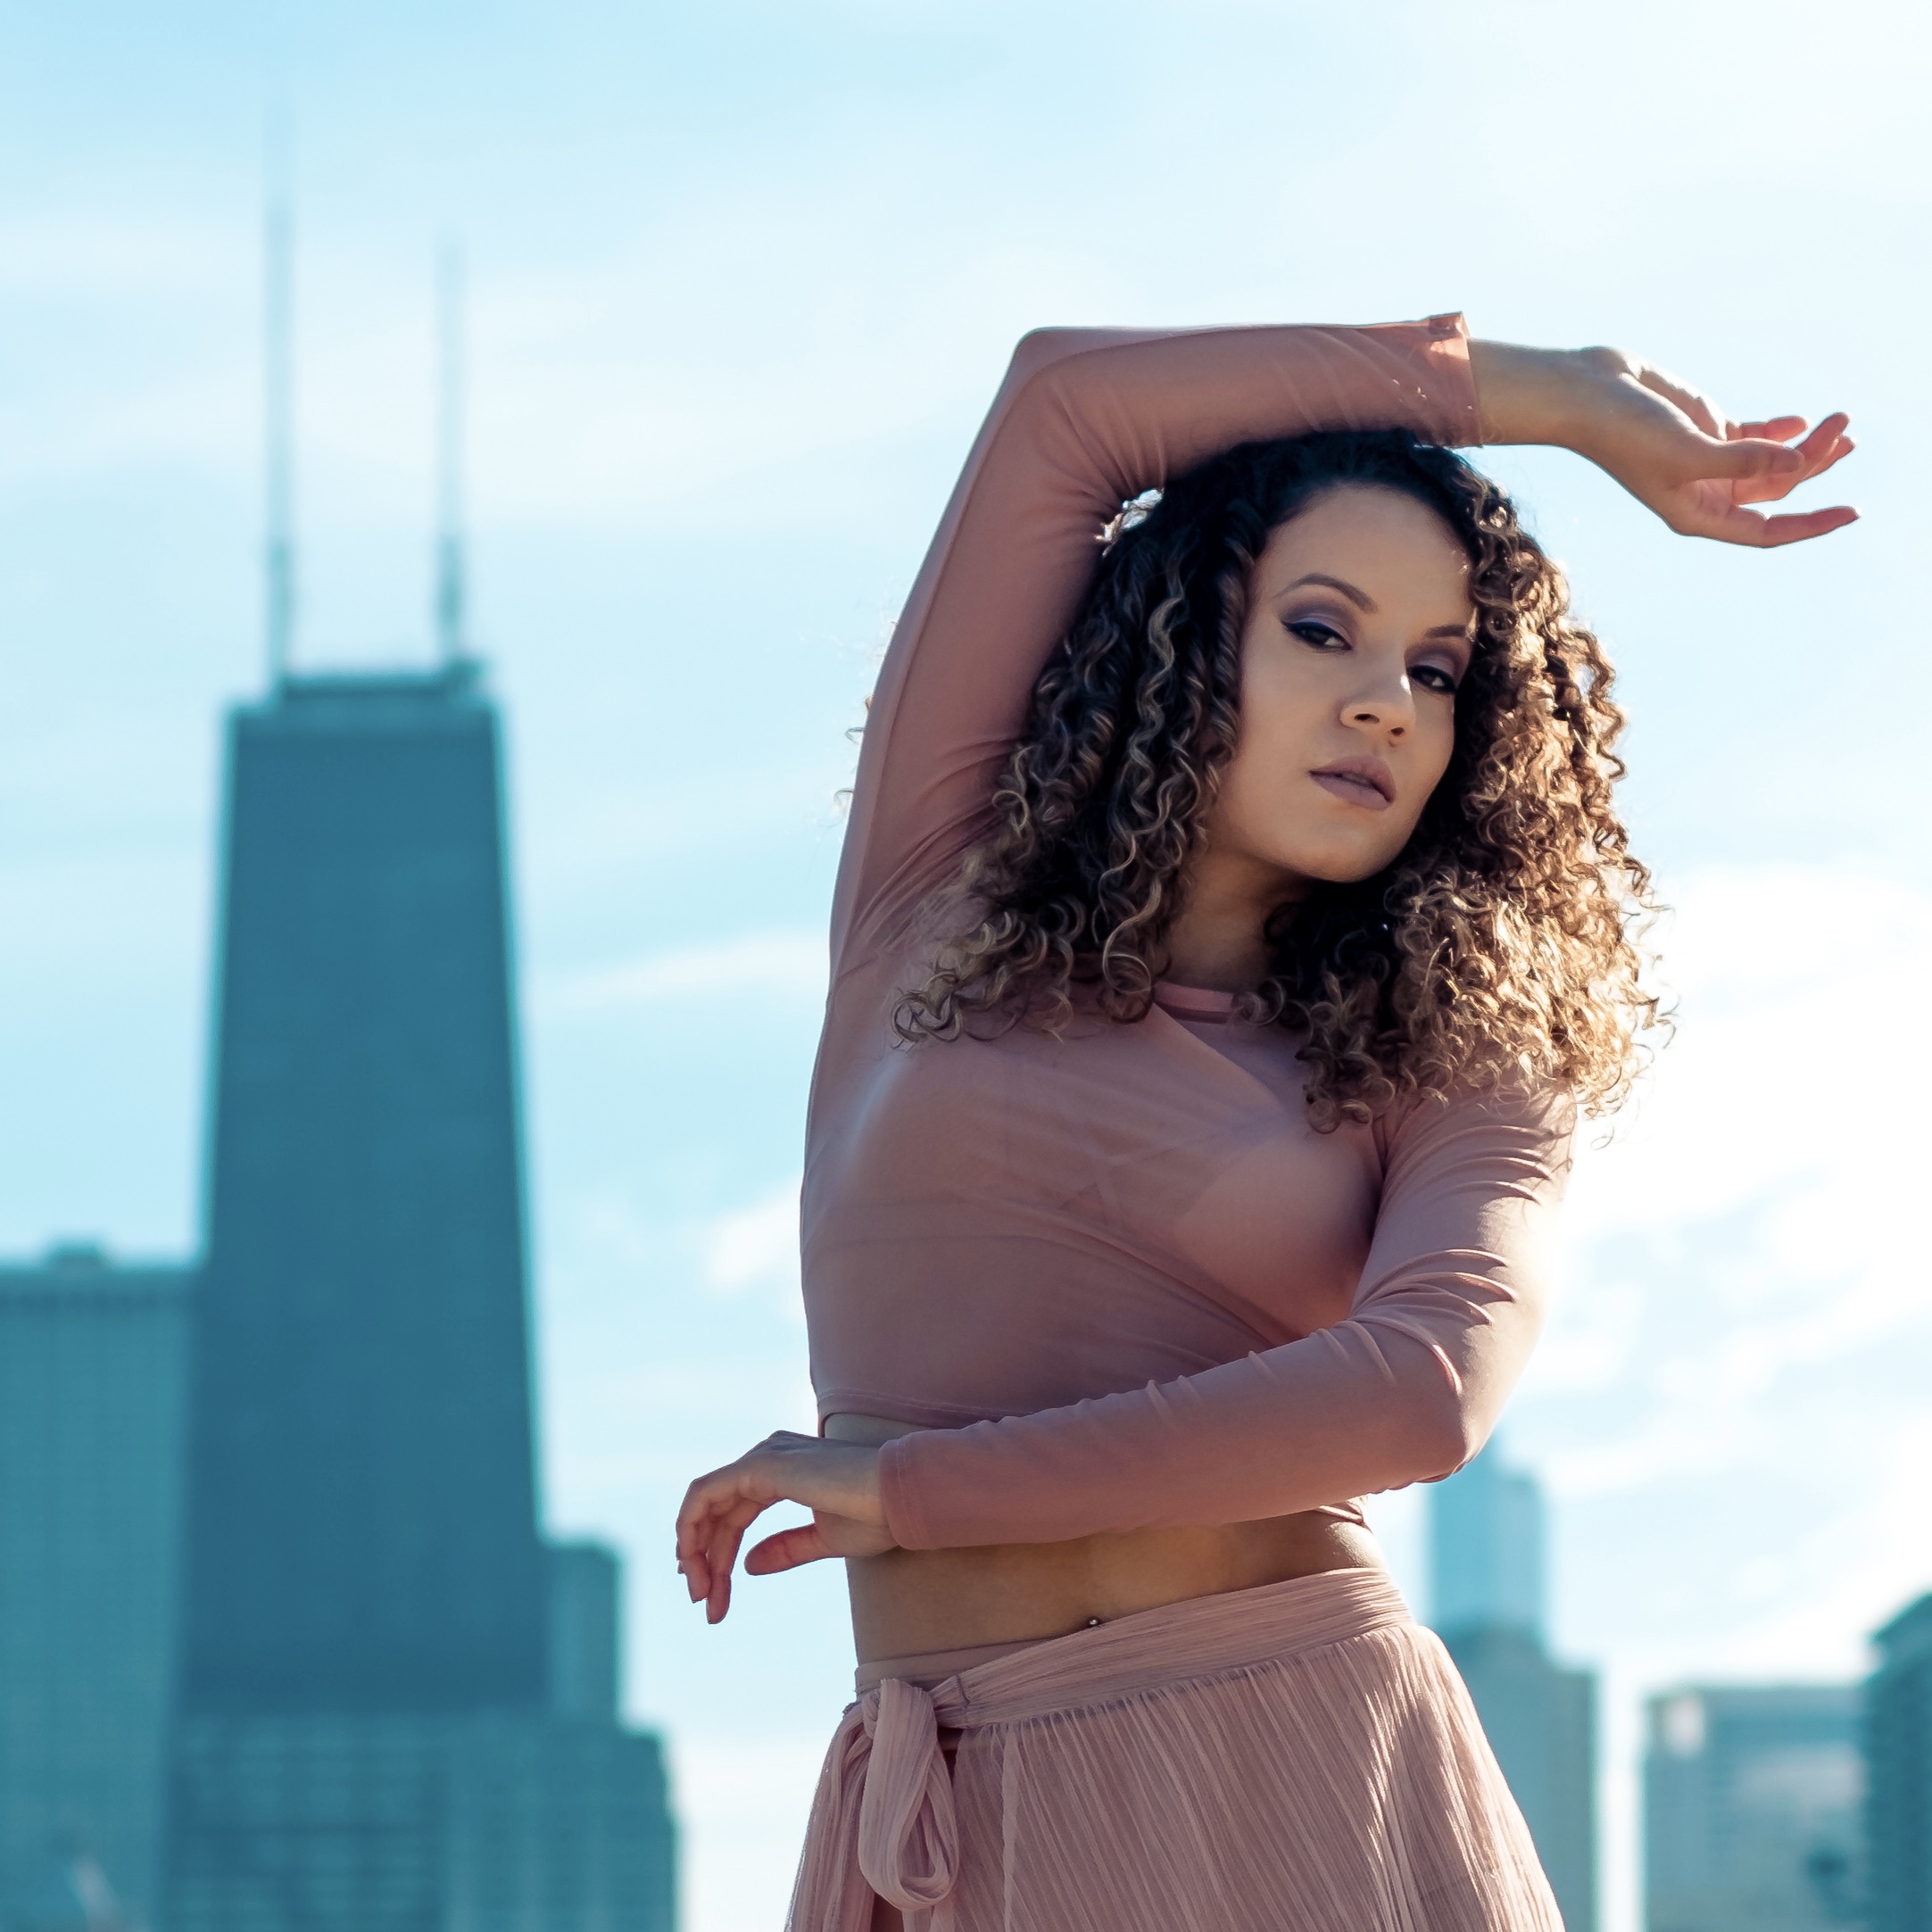 A dancer poses outdoors under a blue sky with skyscrapers in the background.